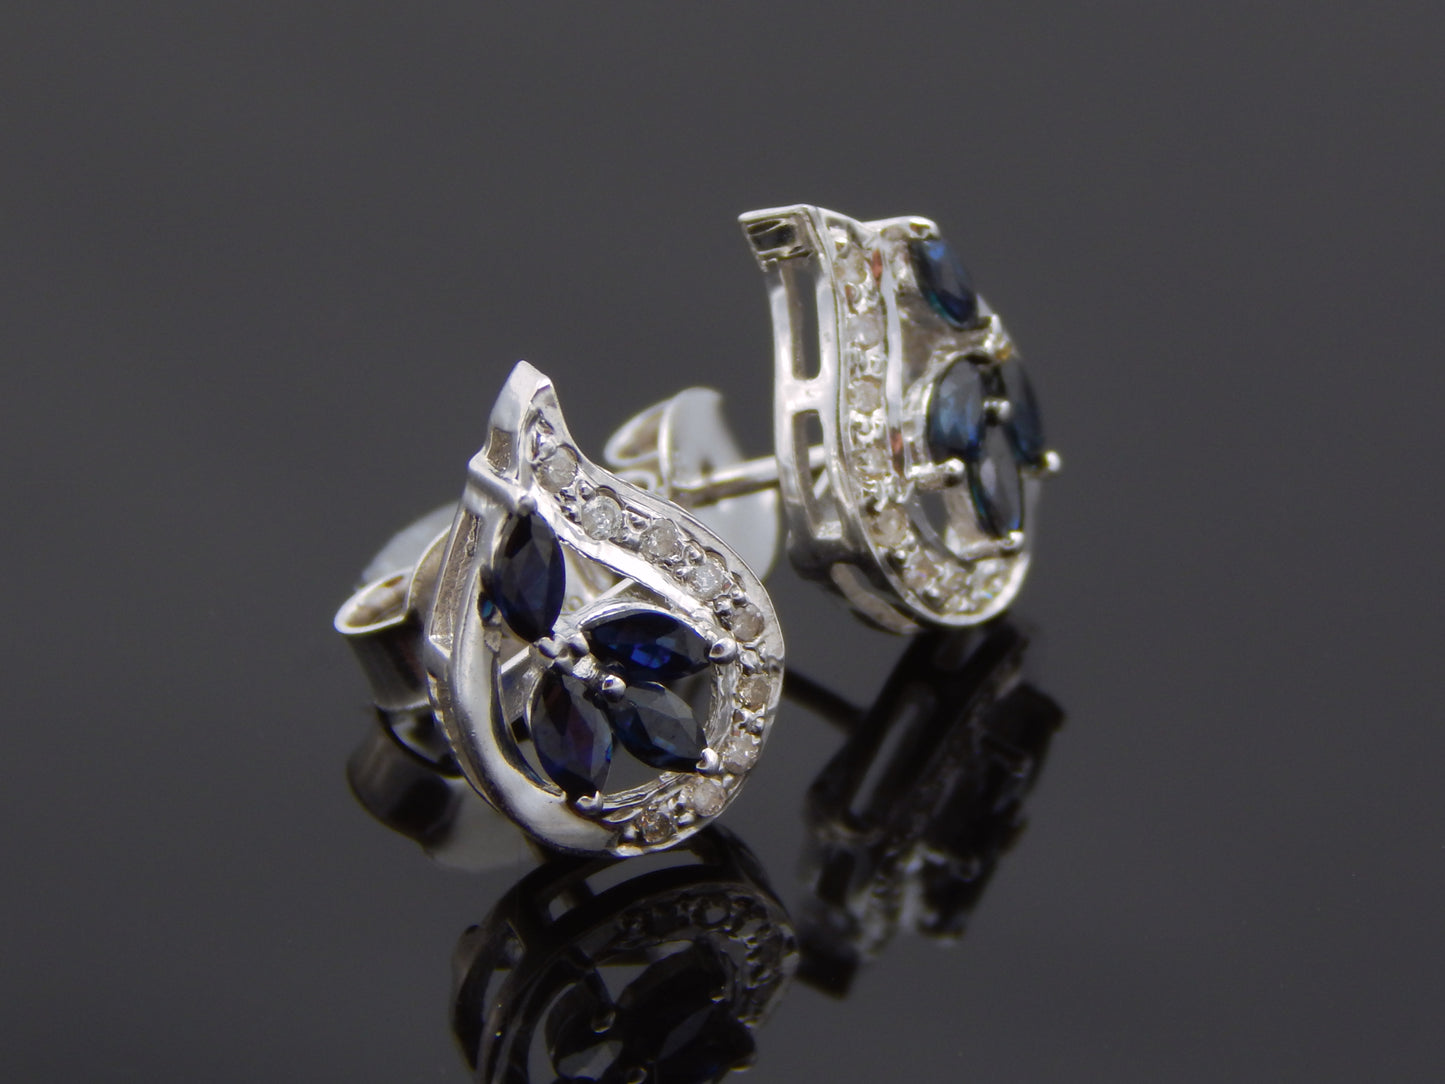 Genuine Blue Sapphire and Diamond Earrings in 925 Sterling Silver